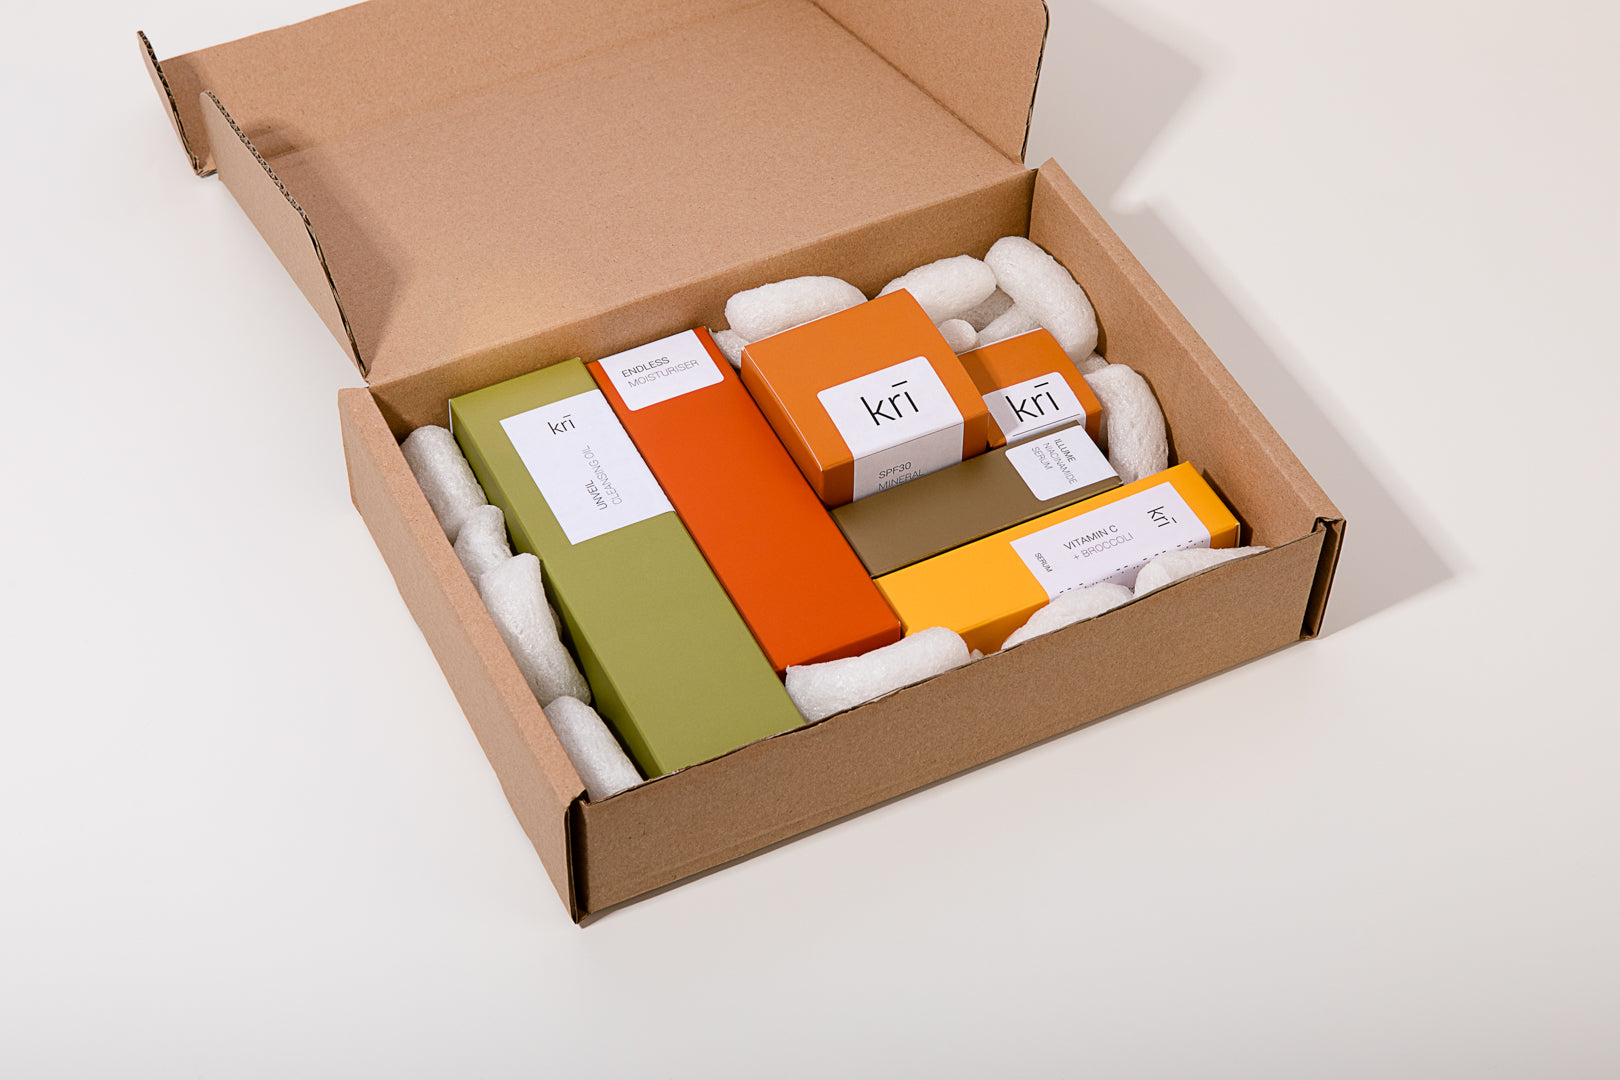 Kri Skincare delivery packaging